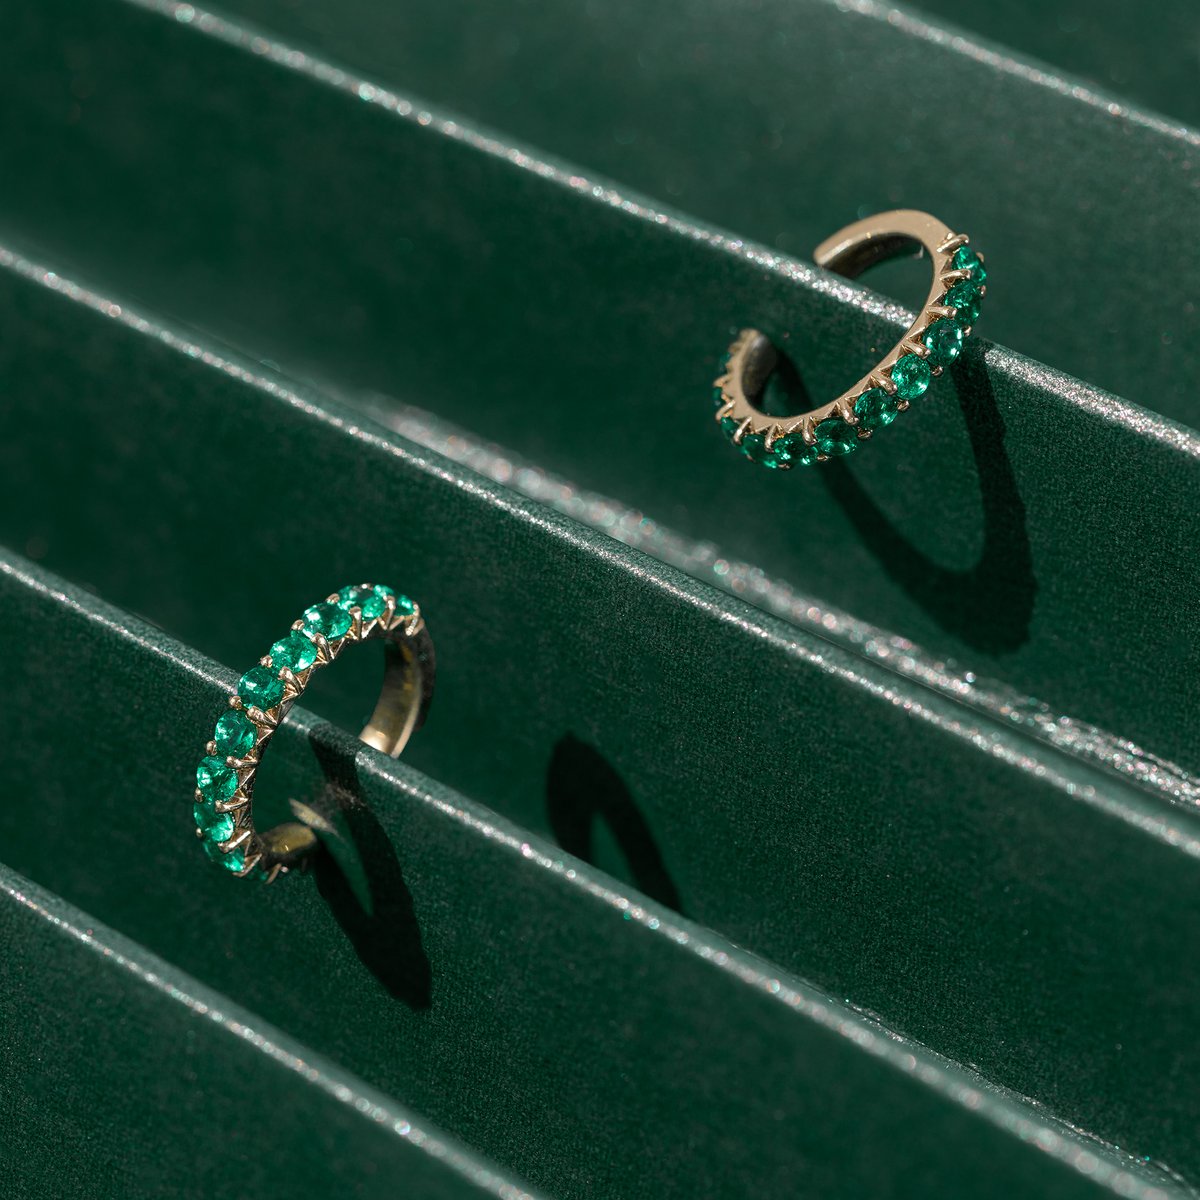 Stackable birthstone ear cuffs. The best part is no piercings are needed.
.
Available in emerald, white diamond and black diamonds.
.
#earparty #earcuffs #emeraldearrings #cuff #designerjewelry #houstonjewelrydesigner #ilasodhani